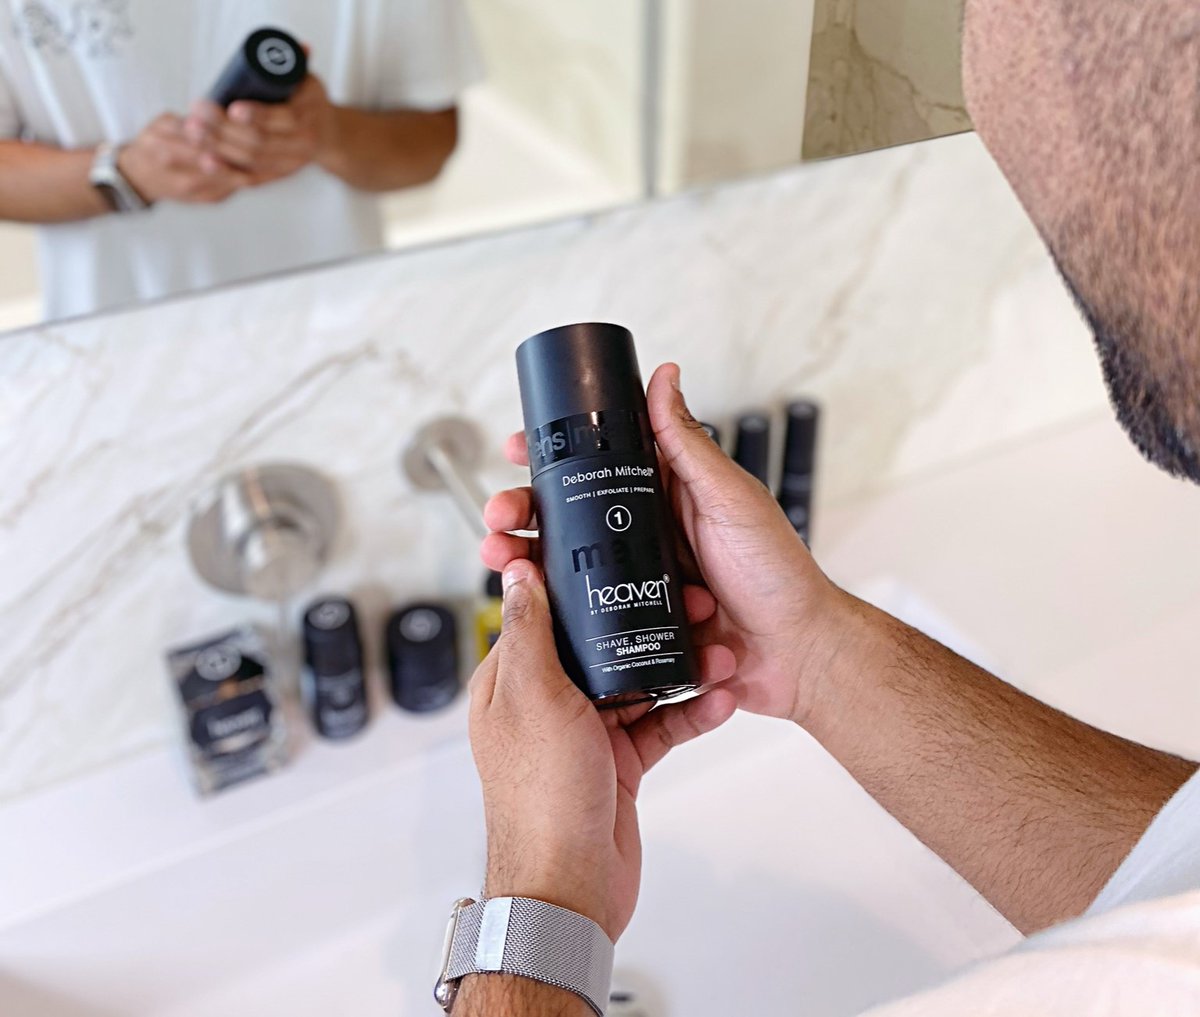 #GroomingTips Who doesn’t love a product with a multitude of uses! Use my Shave, Shower & Shampoo as a shower gel, a shampoo and a shaving wash. It suits all skin types and contains organic essential oils. Win, win 👏 #FathersDay #HeavenSkincare ow.ly/ScVC50OzYiL